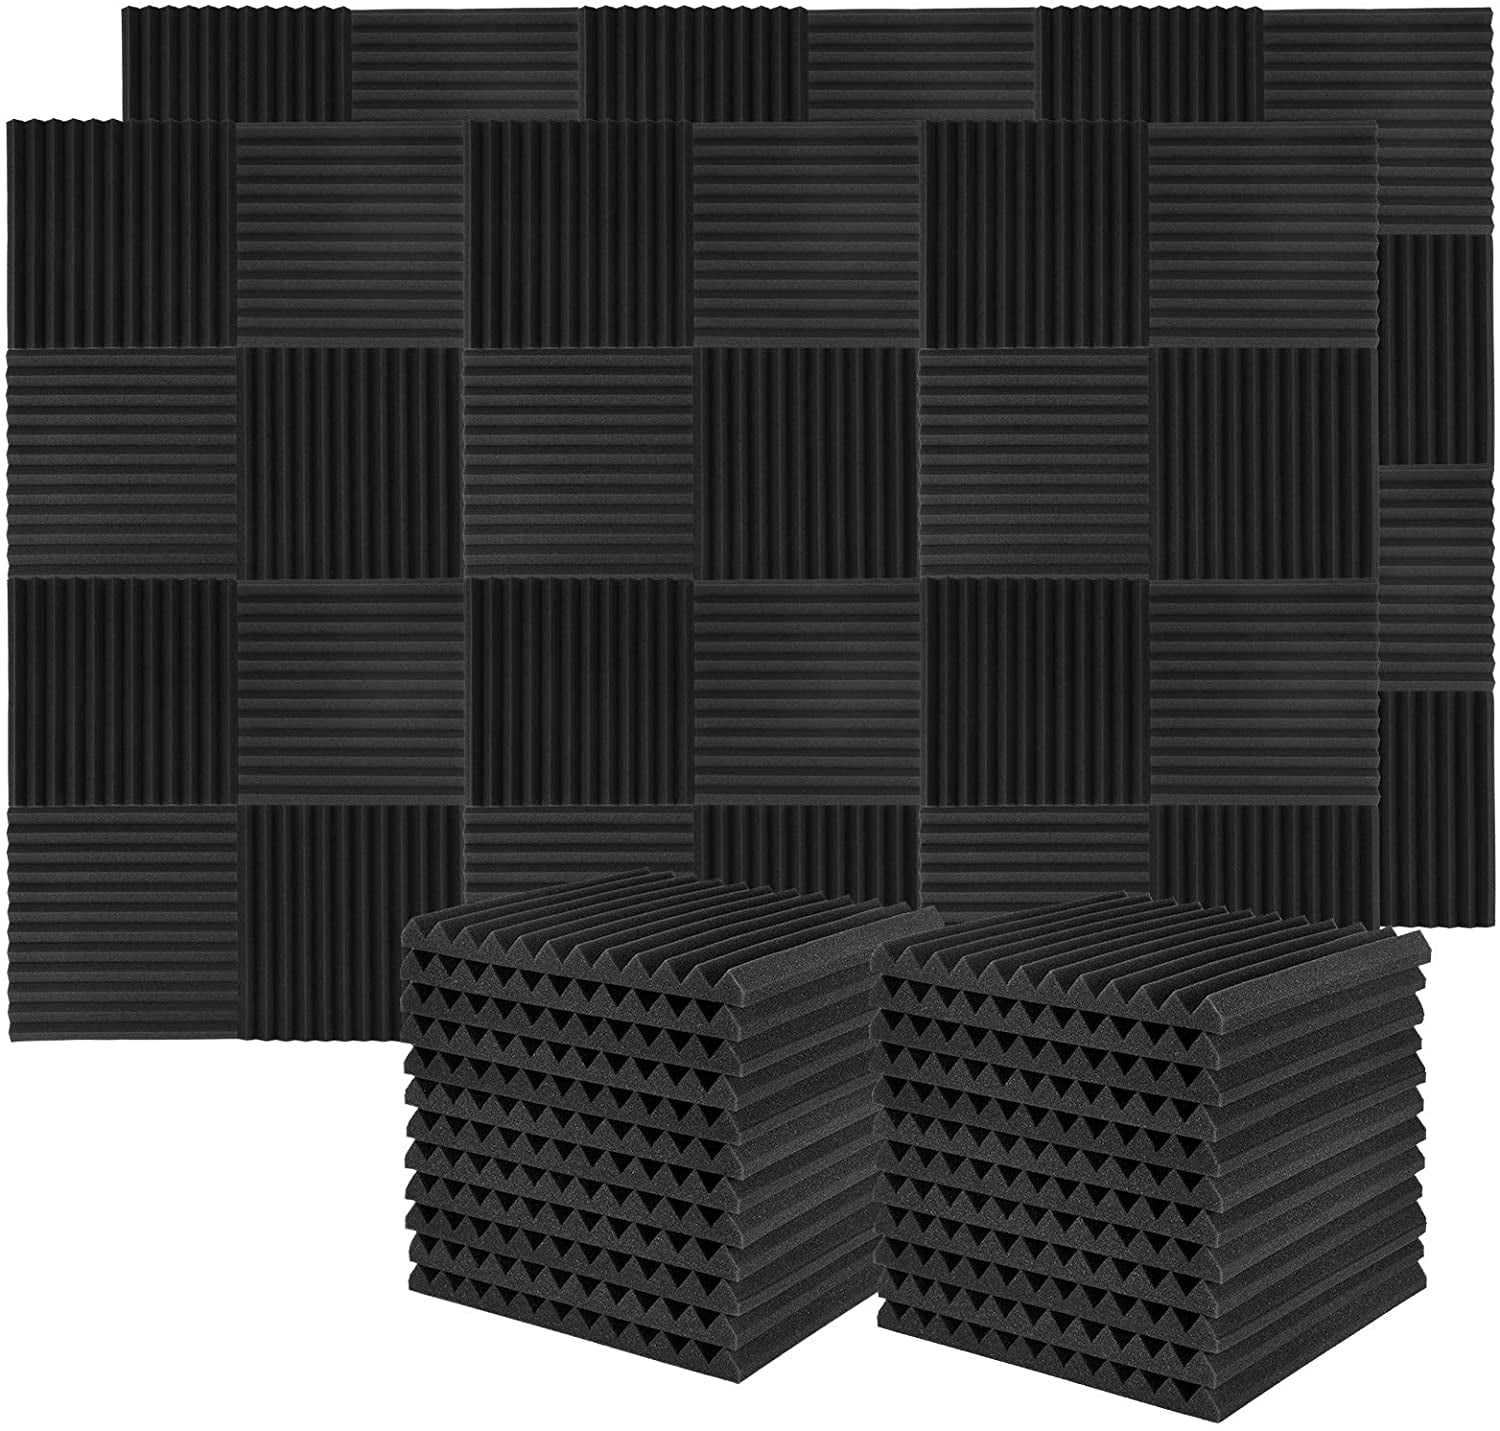 24pcs Acoustic Foam for Ceiling Wall Sound Insulation Panel Blue-Black 